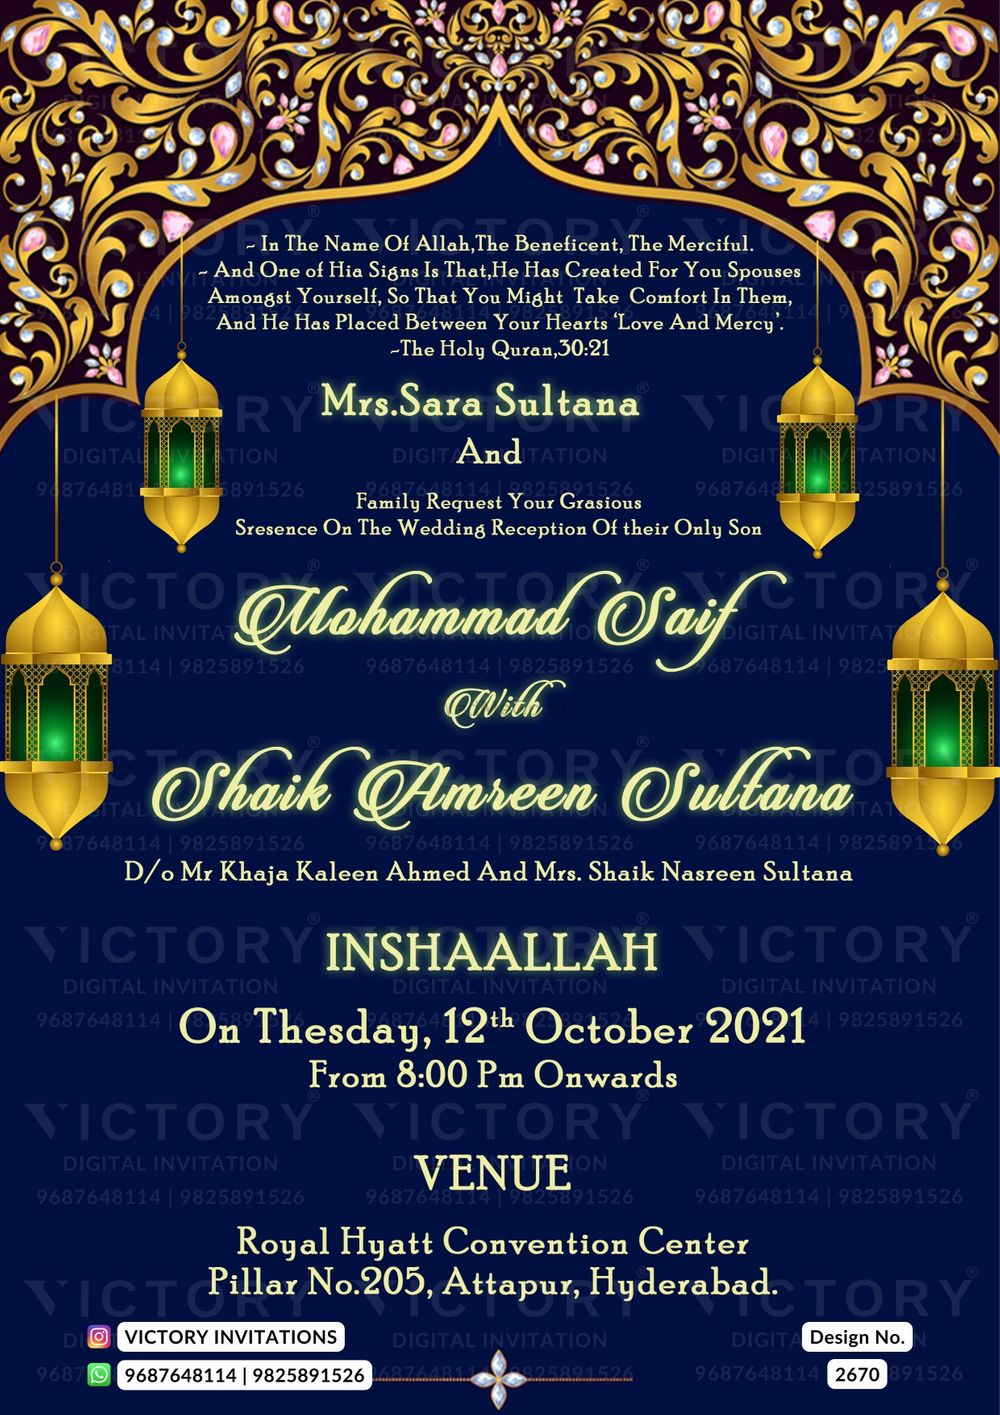 Photo From Nikah Ceremony - By Victory Invitations